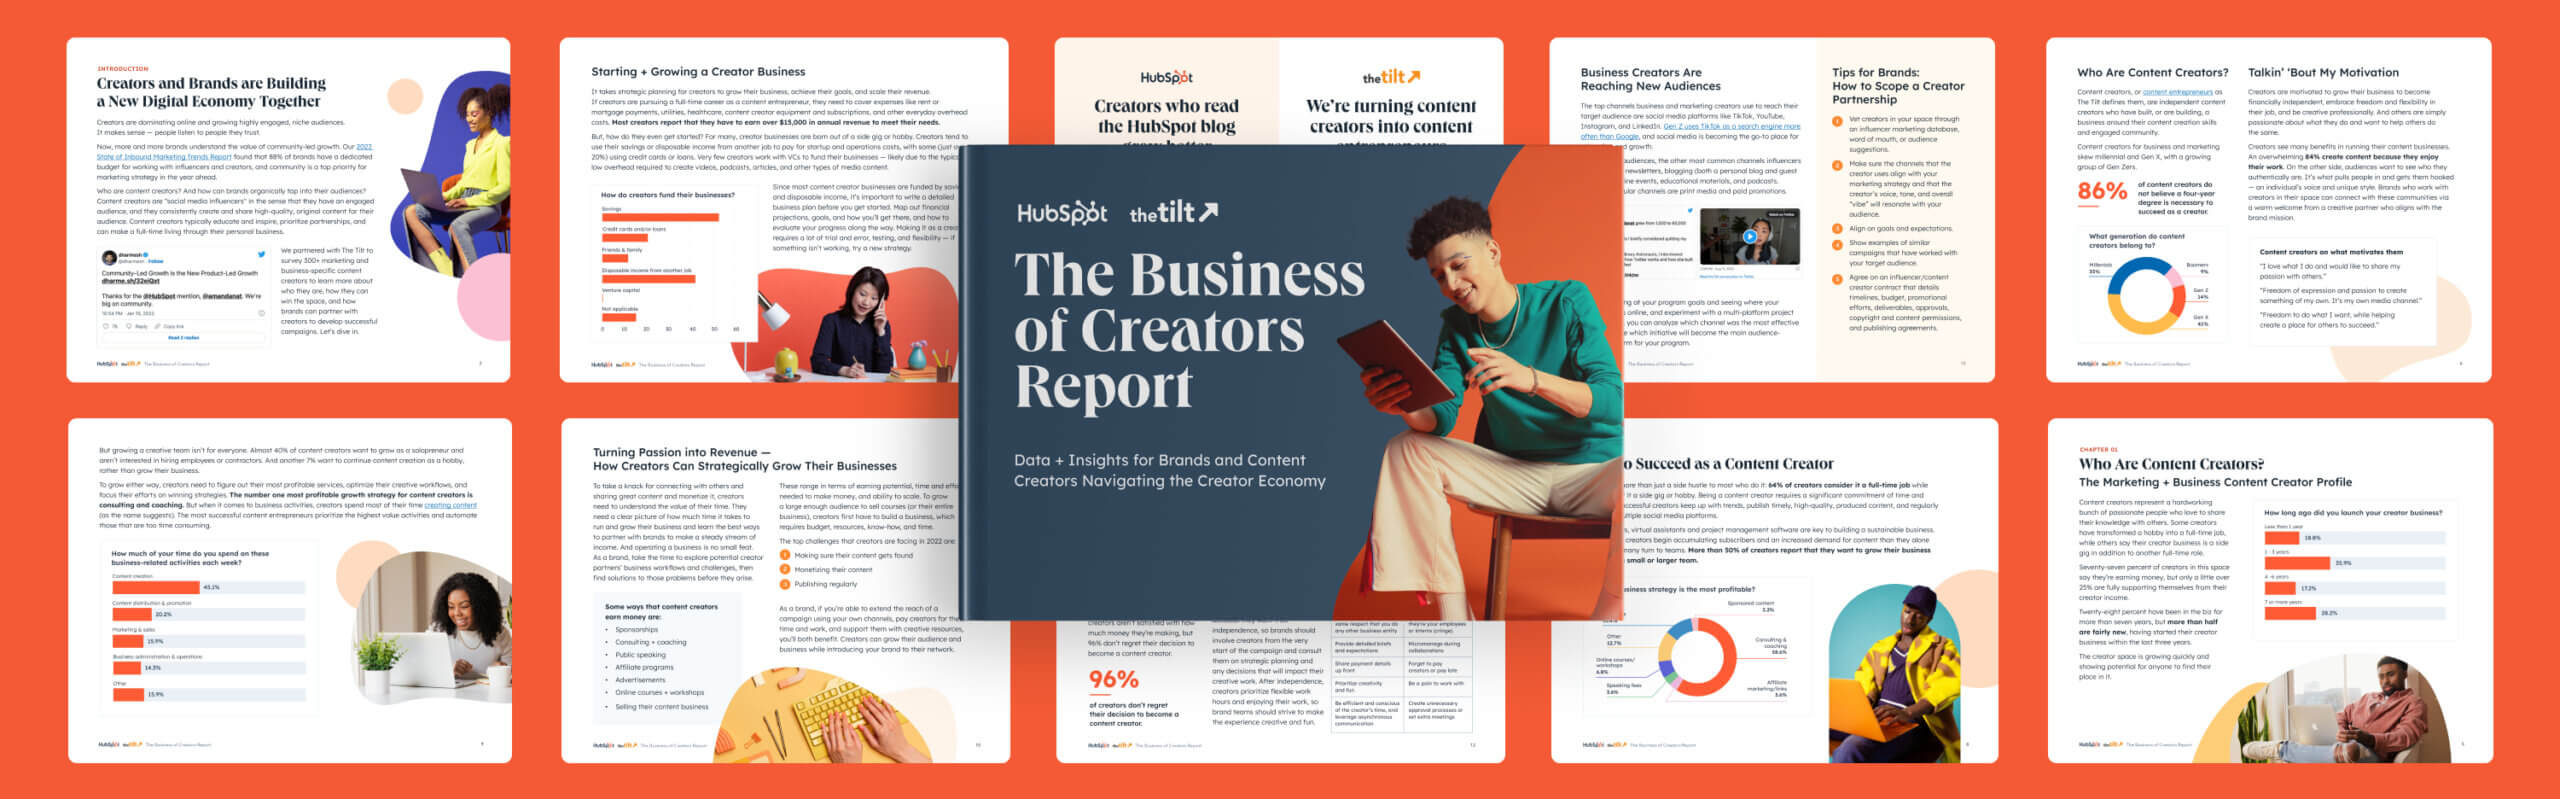 HubSpot The Business of Creators Report cover and interior pages